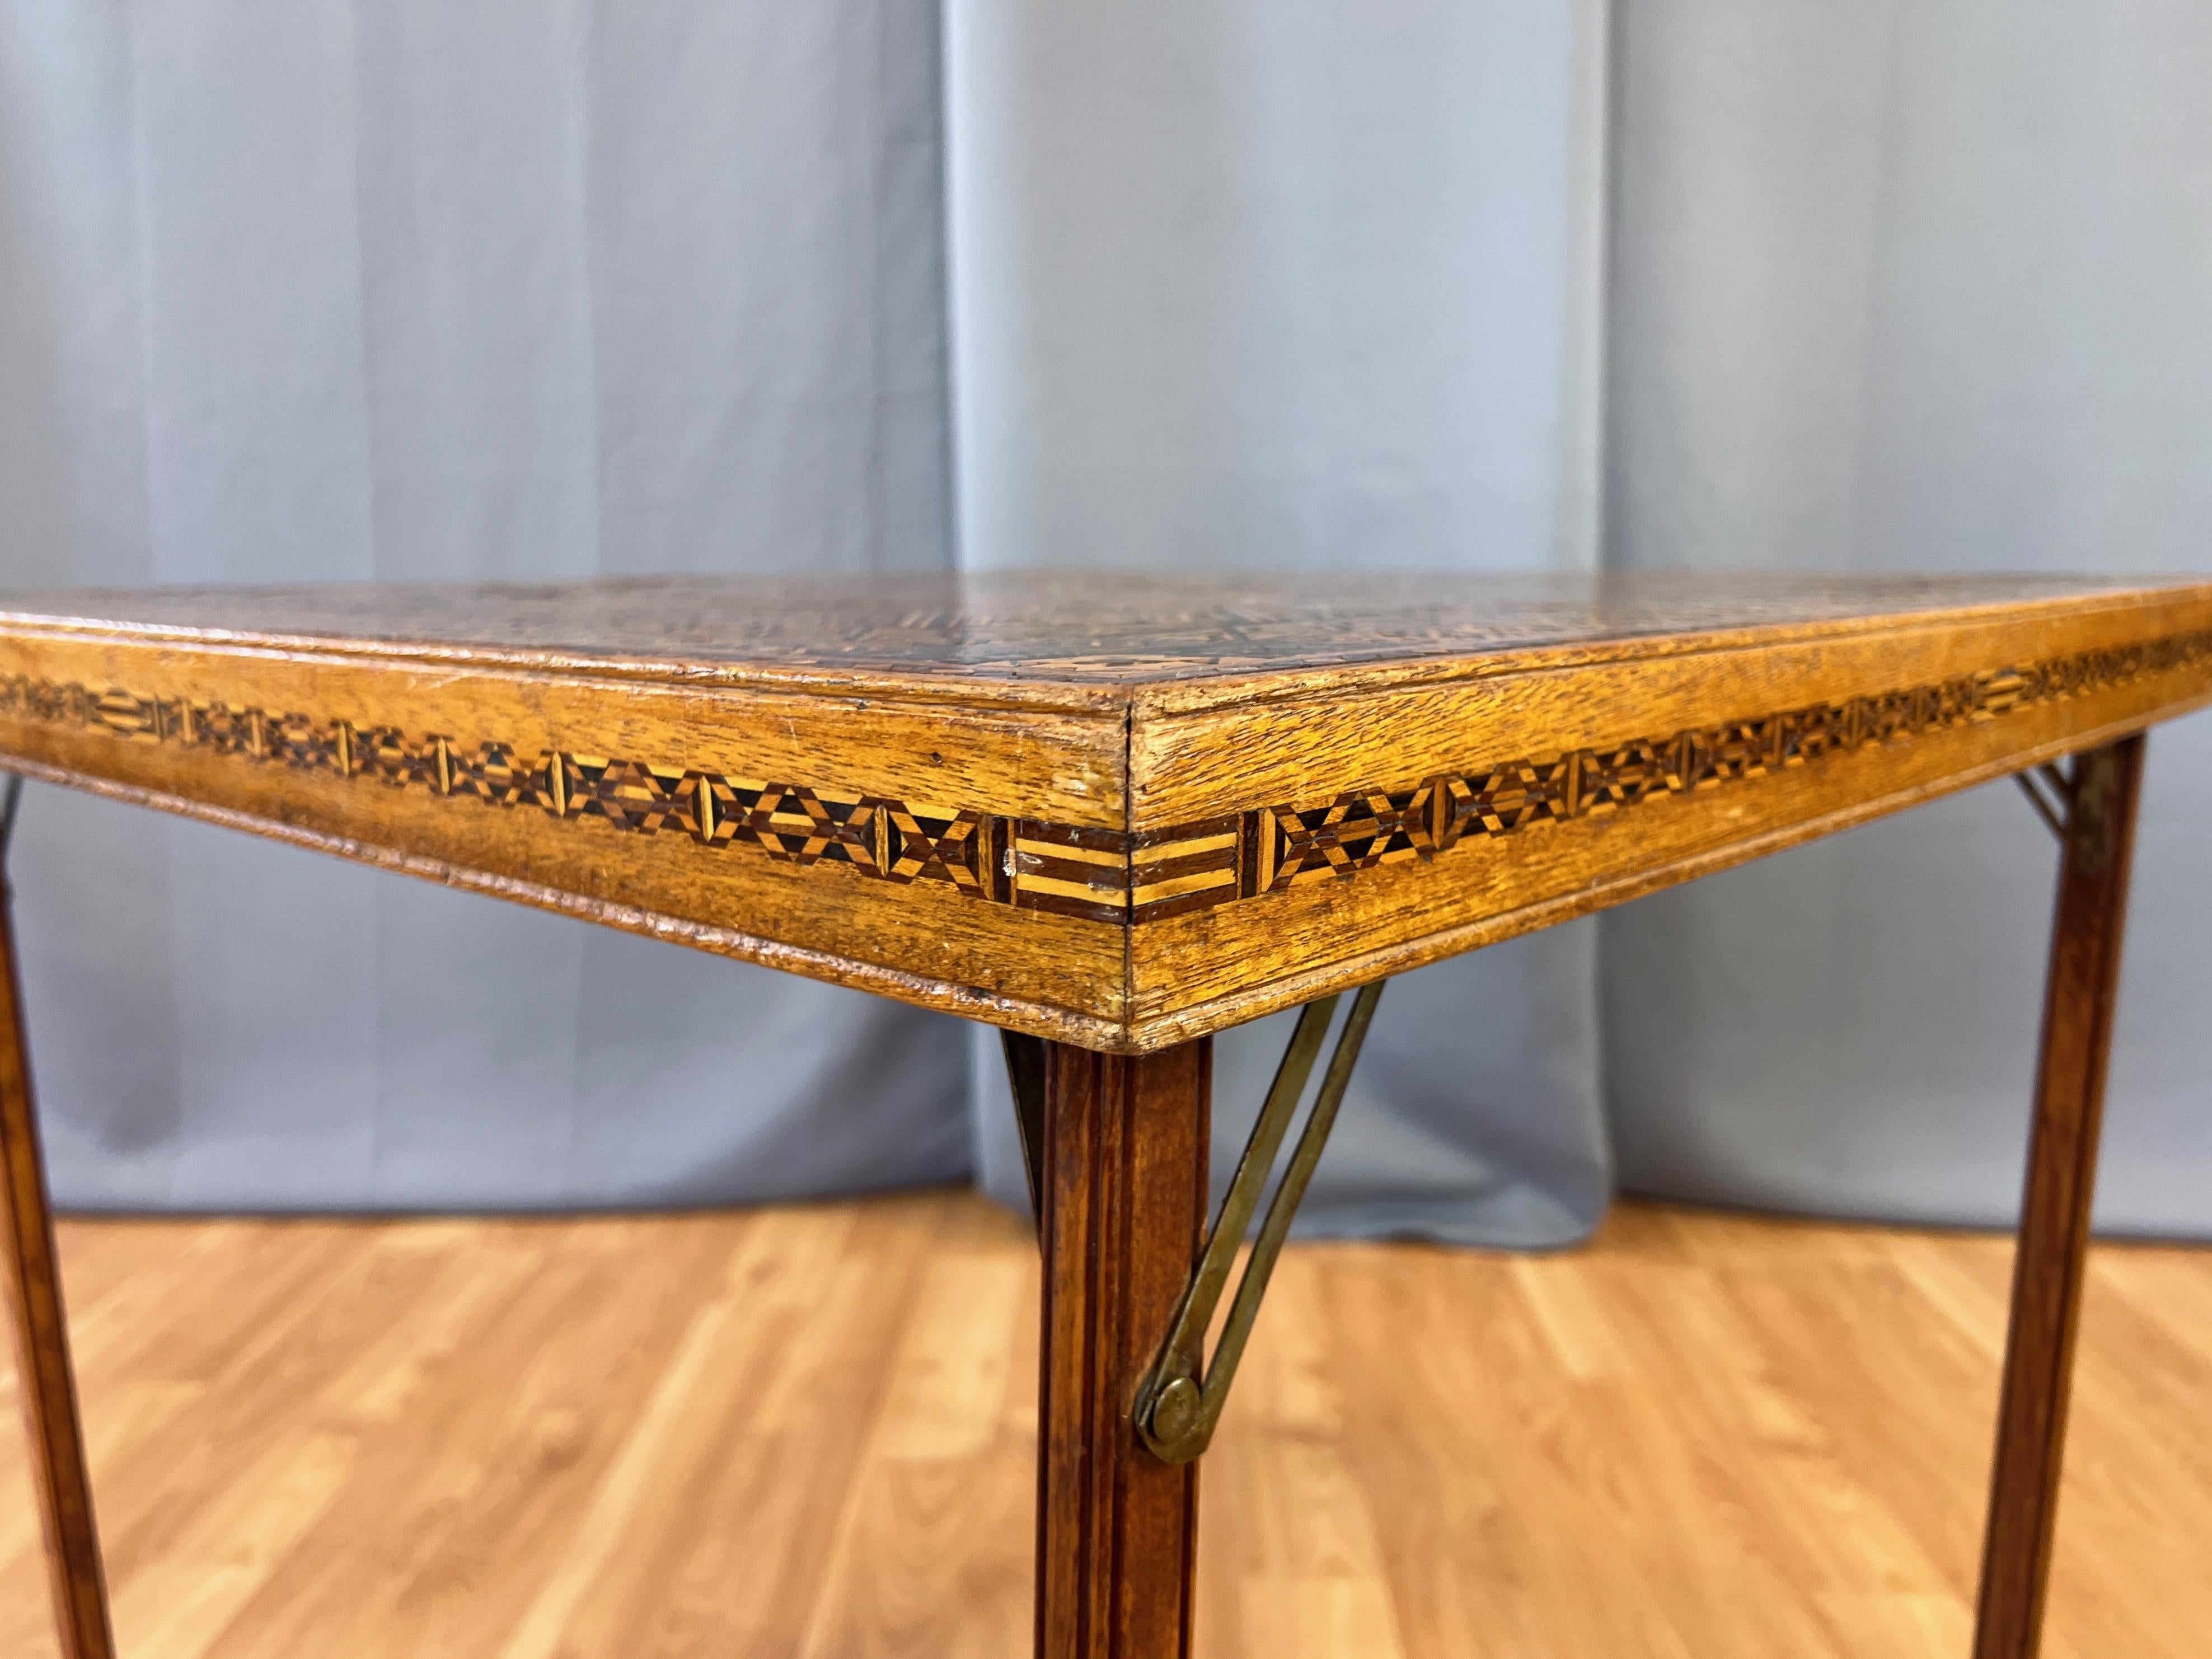 Syrian-Style Exceptionally Intricate Wood Marquetry Folding Card Table, 1930s For Sale 8